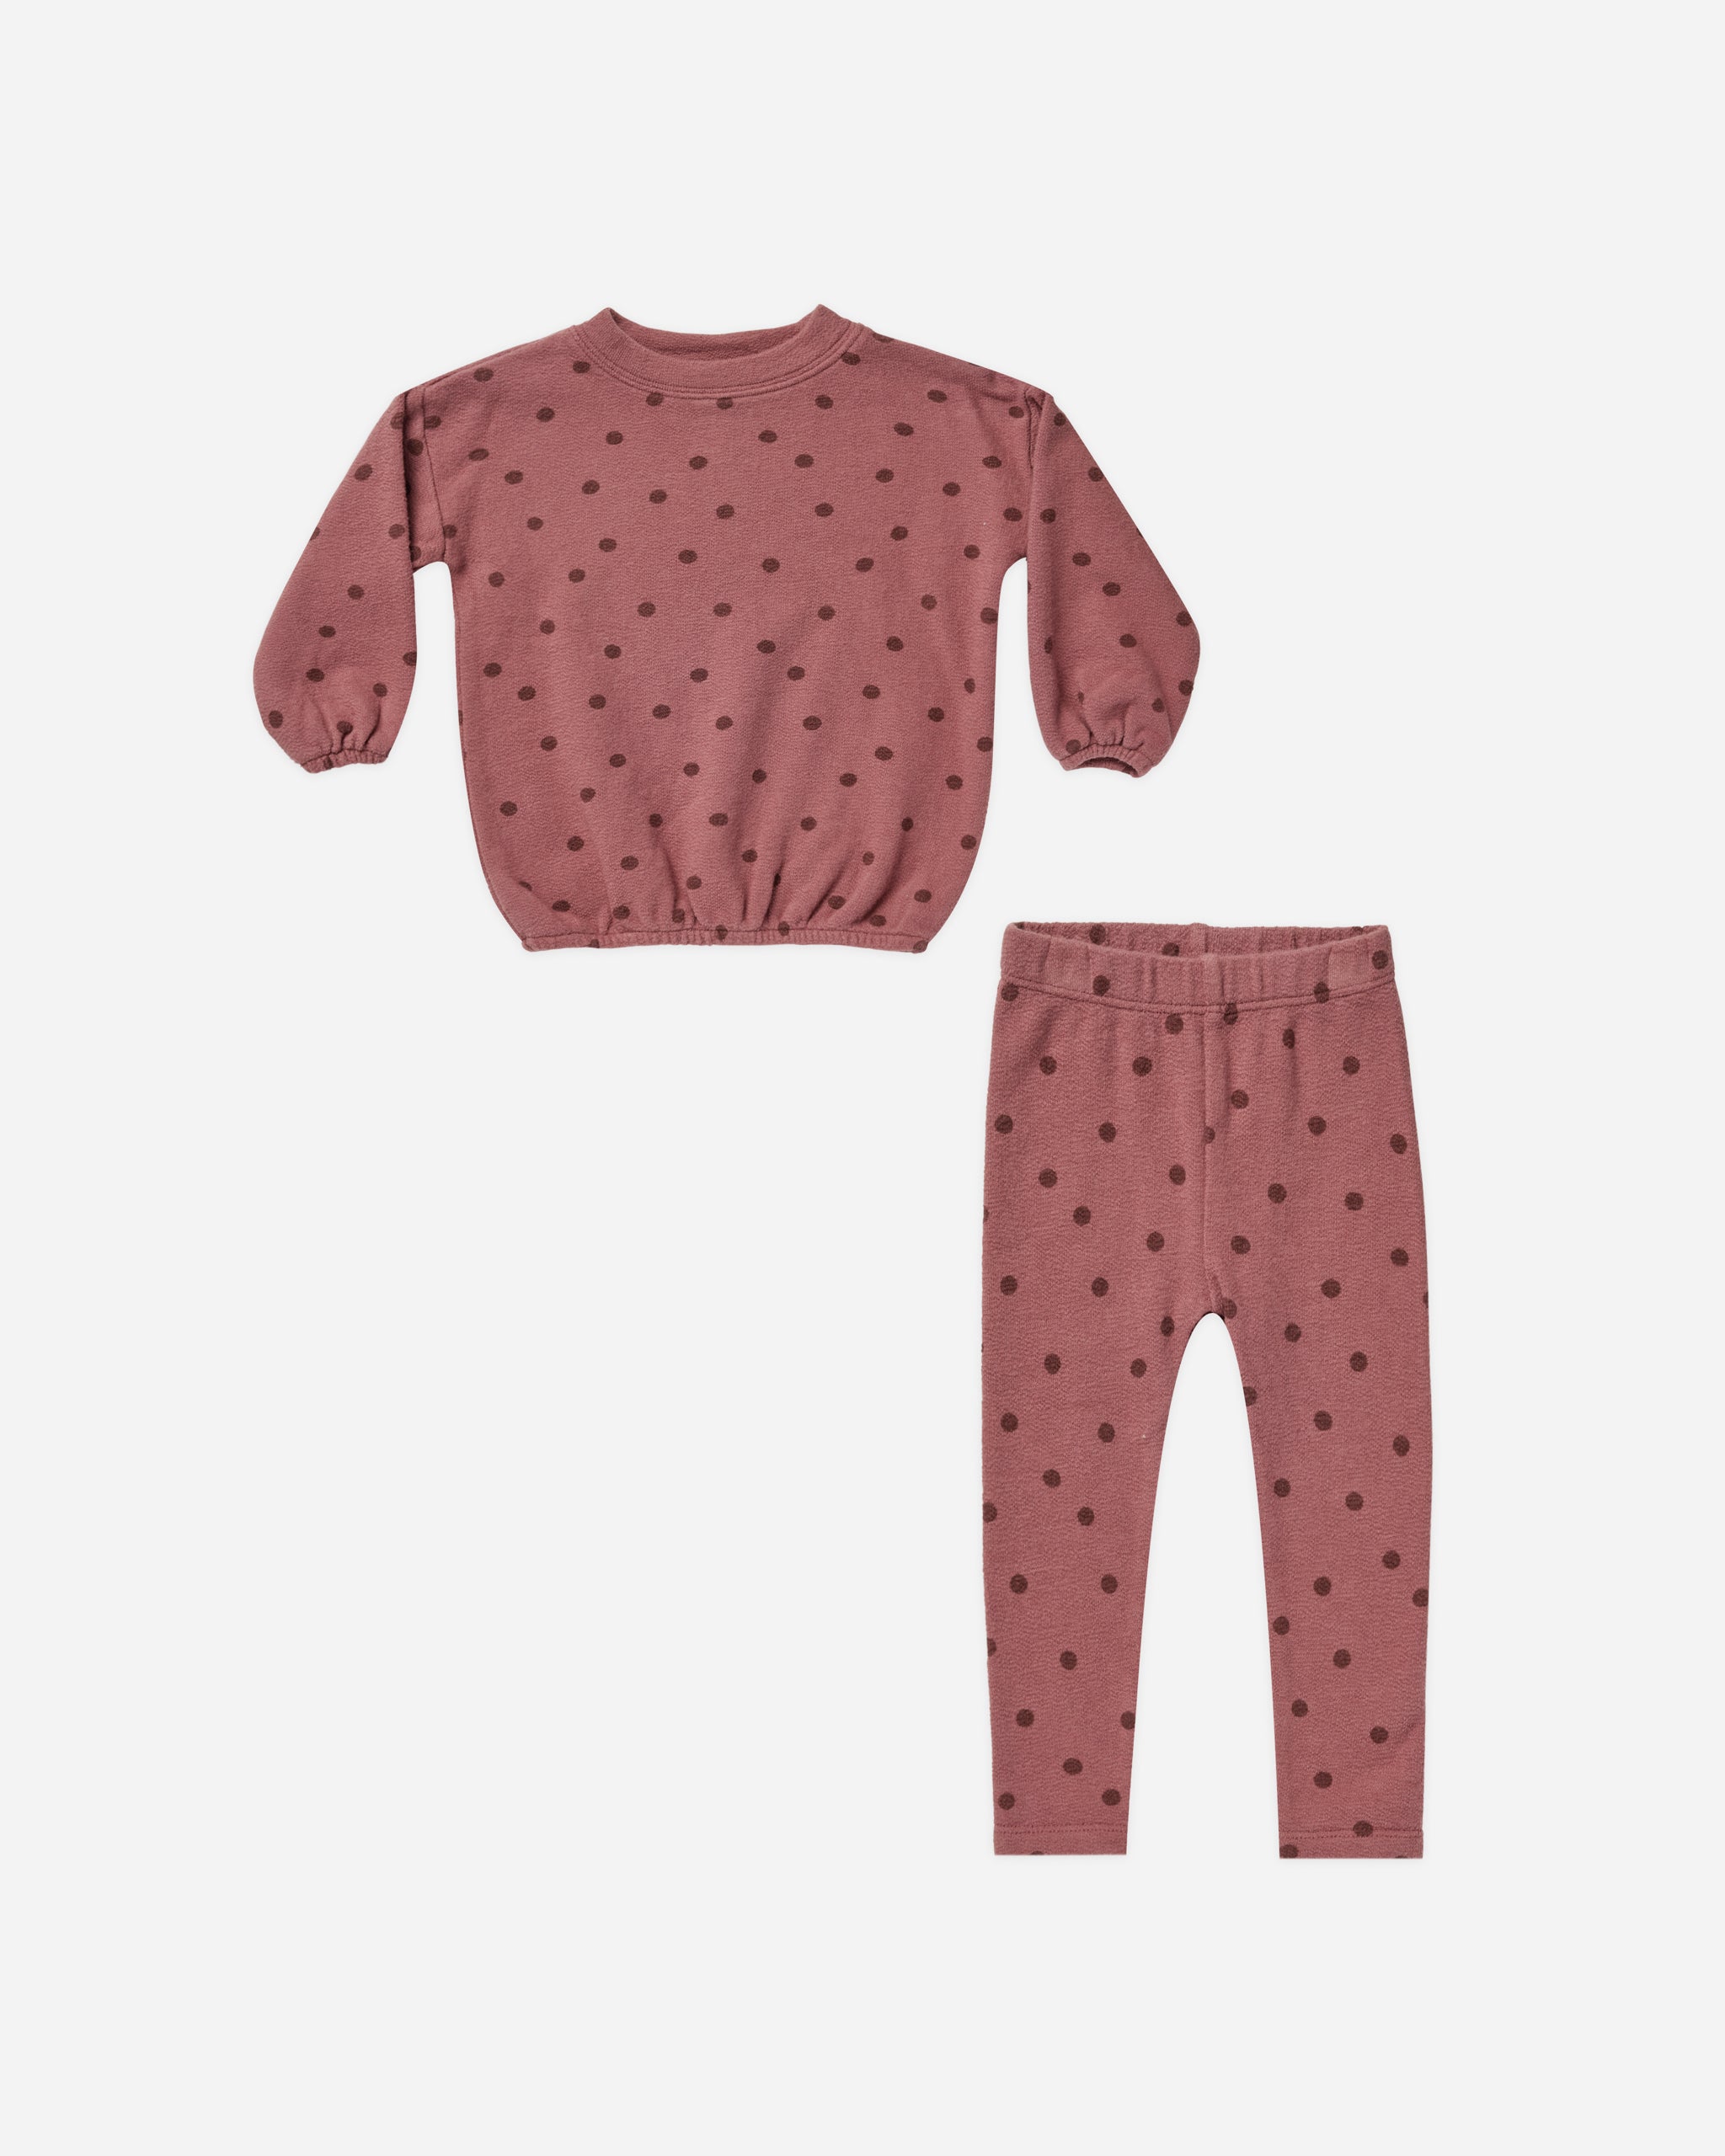 Spongey Knit Set || Polka Dot - Rylee + Cru | Kids Clothes | Trendy Baby Clothes | Modern Infant Outfits |